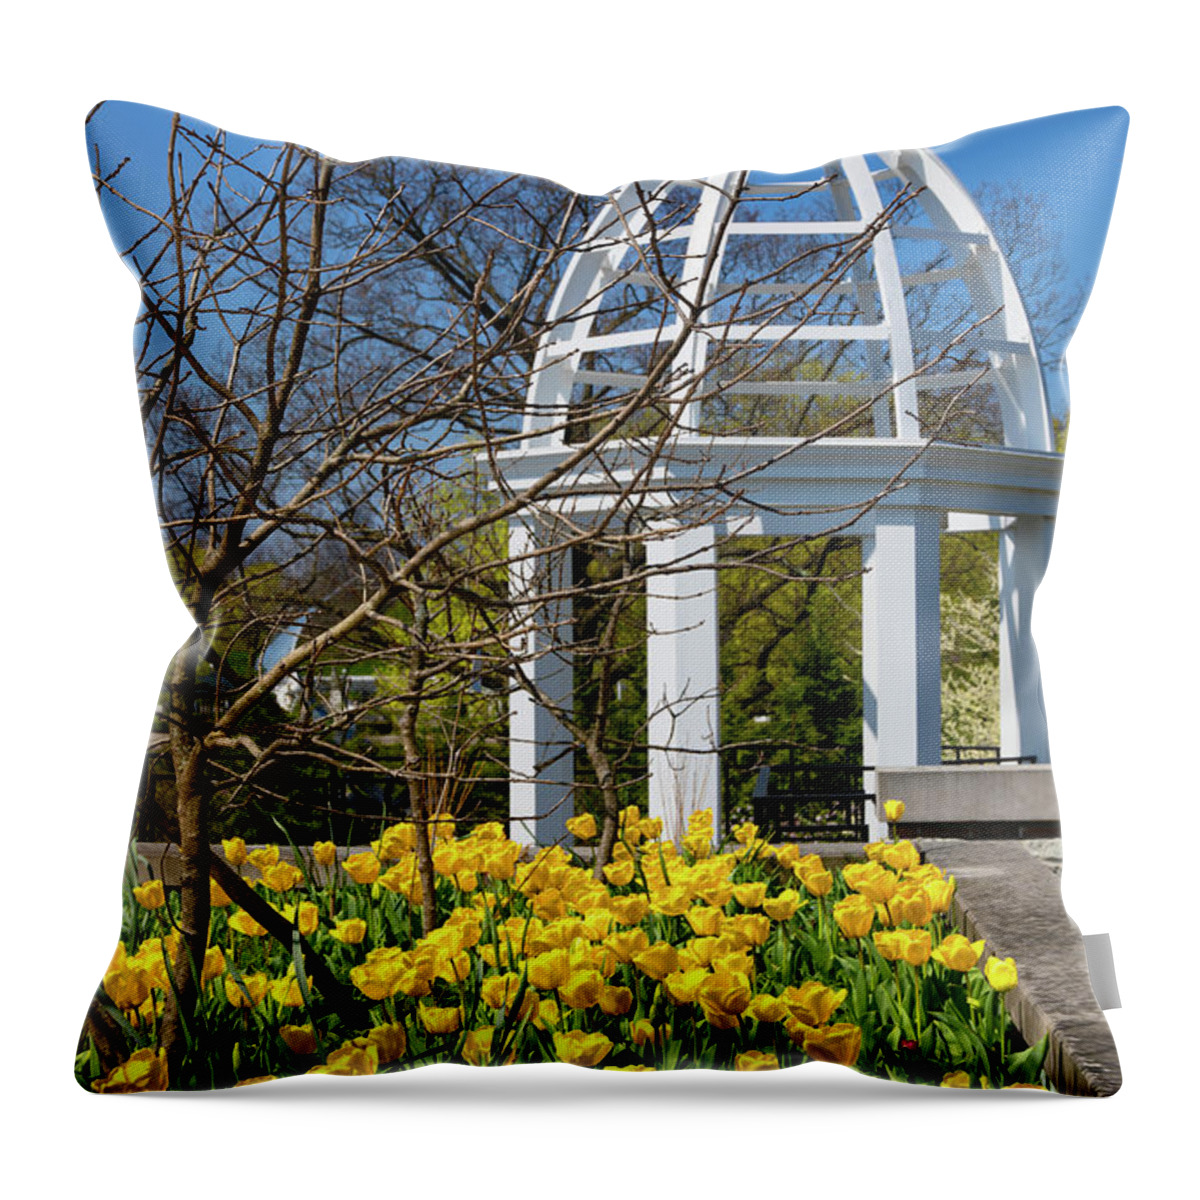 Tulip Throw Pillow featuring the photograph Yellow Tulips and Gazebo by Tom Mc Nemar